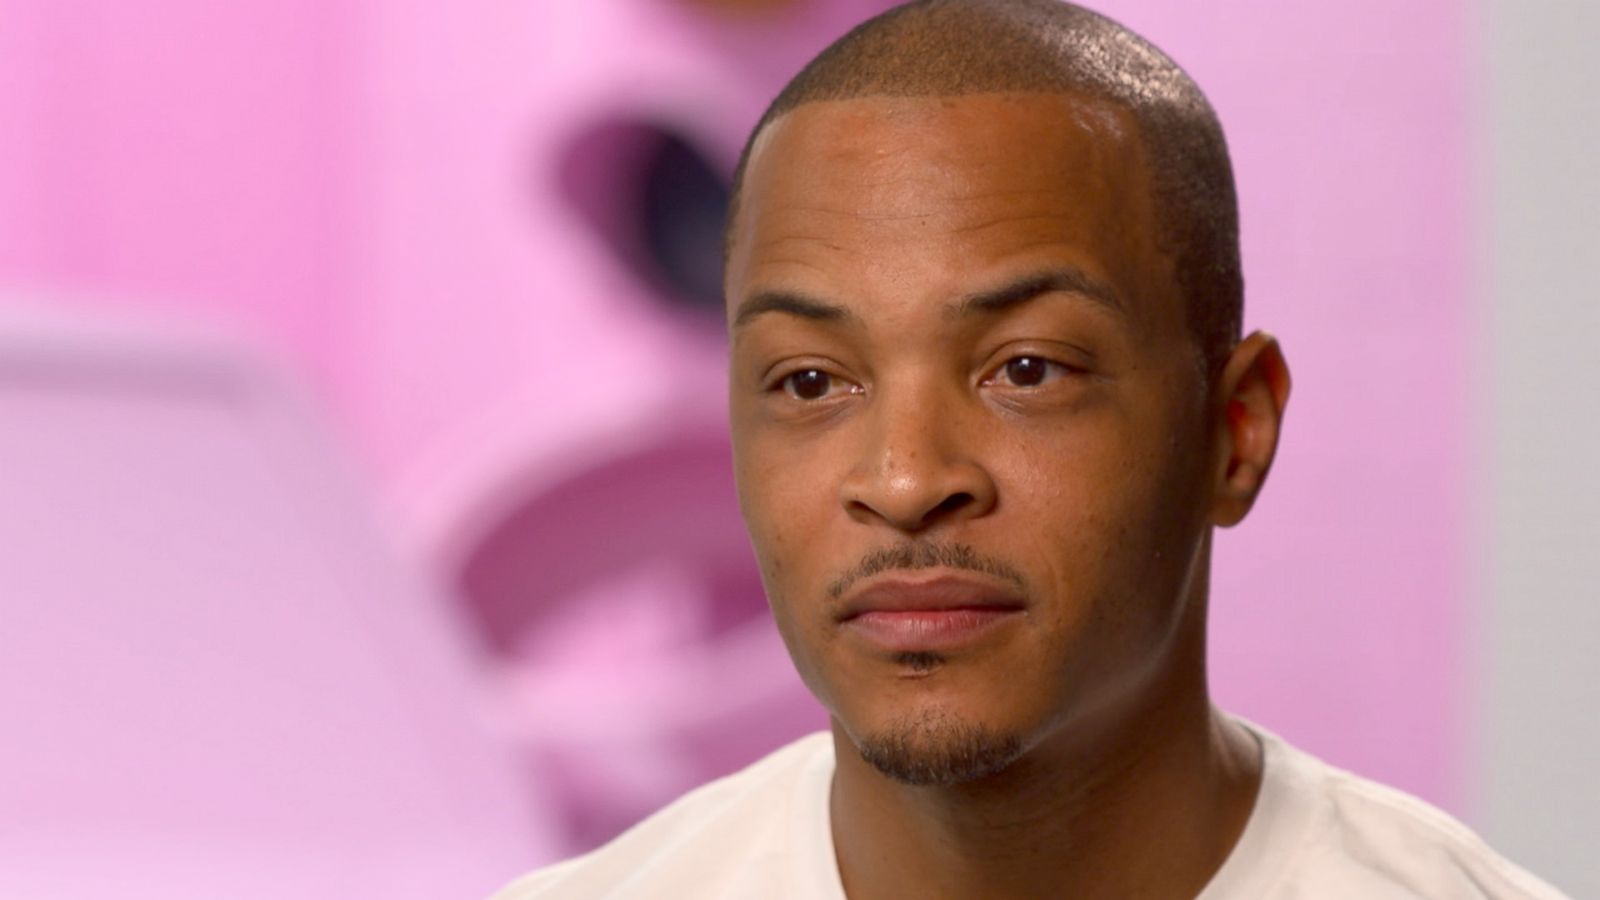 T.I. back home in Atlanta: The rapper talks finding salvation through music and giving back to his community - ABC News